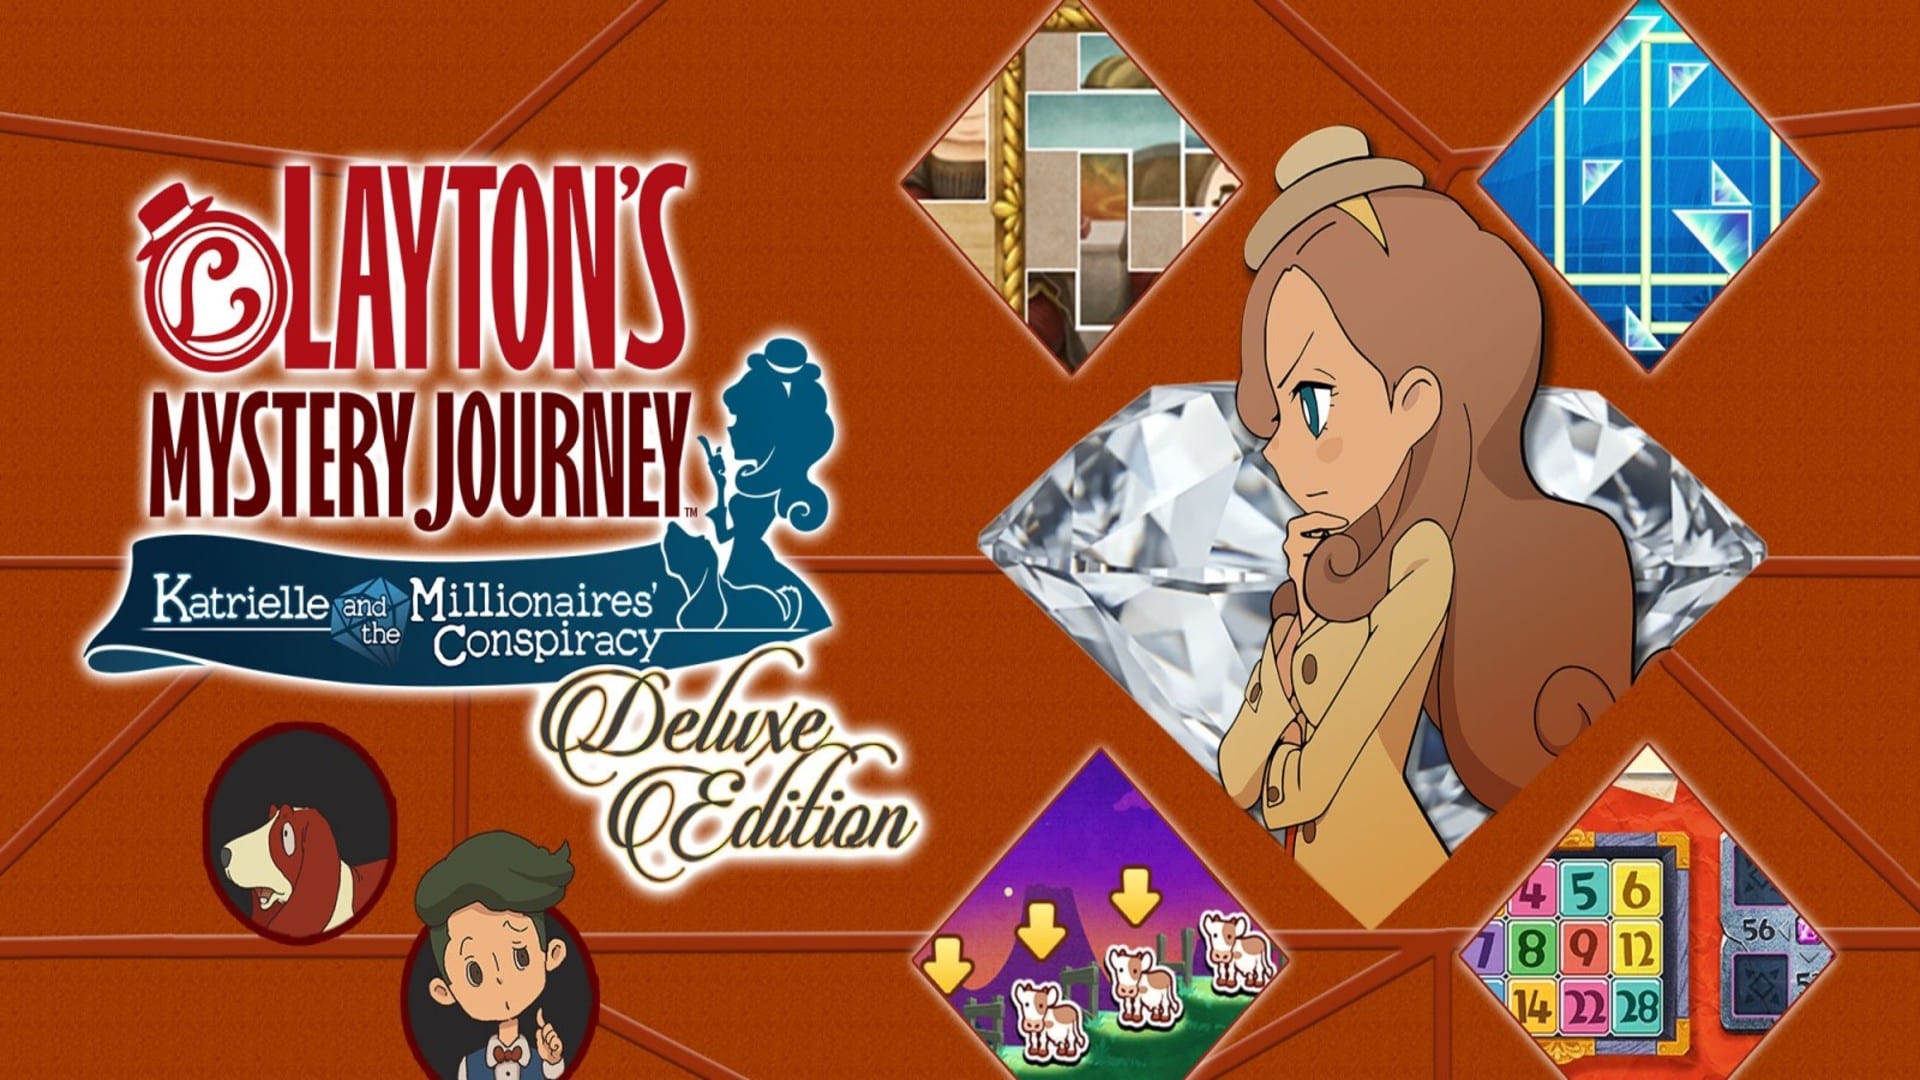 Laytons Mystery Journey real Main image